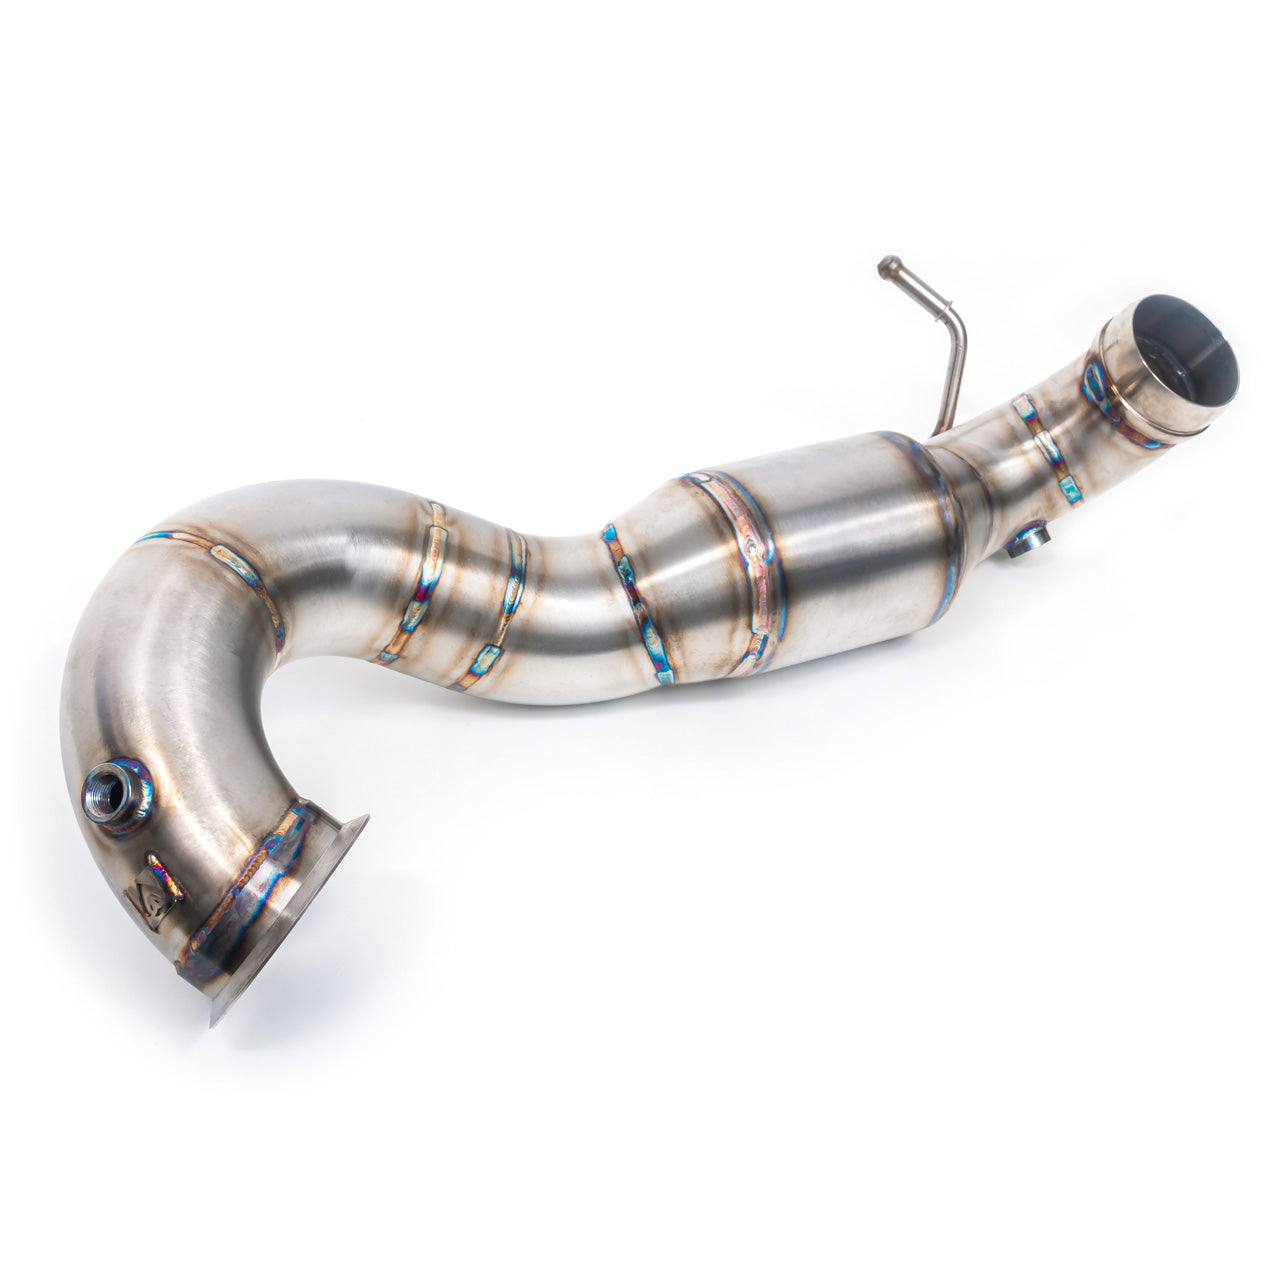 Cobra Sport Mercedes-AMG A 45 Front Downpipe Sports Cat / De-Cat Performance Exhaust - Wayside Performance 